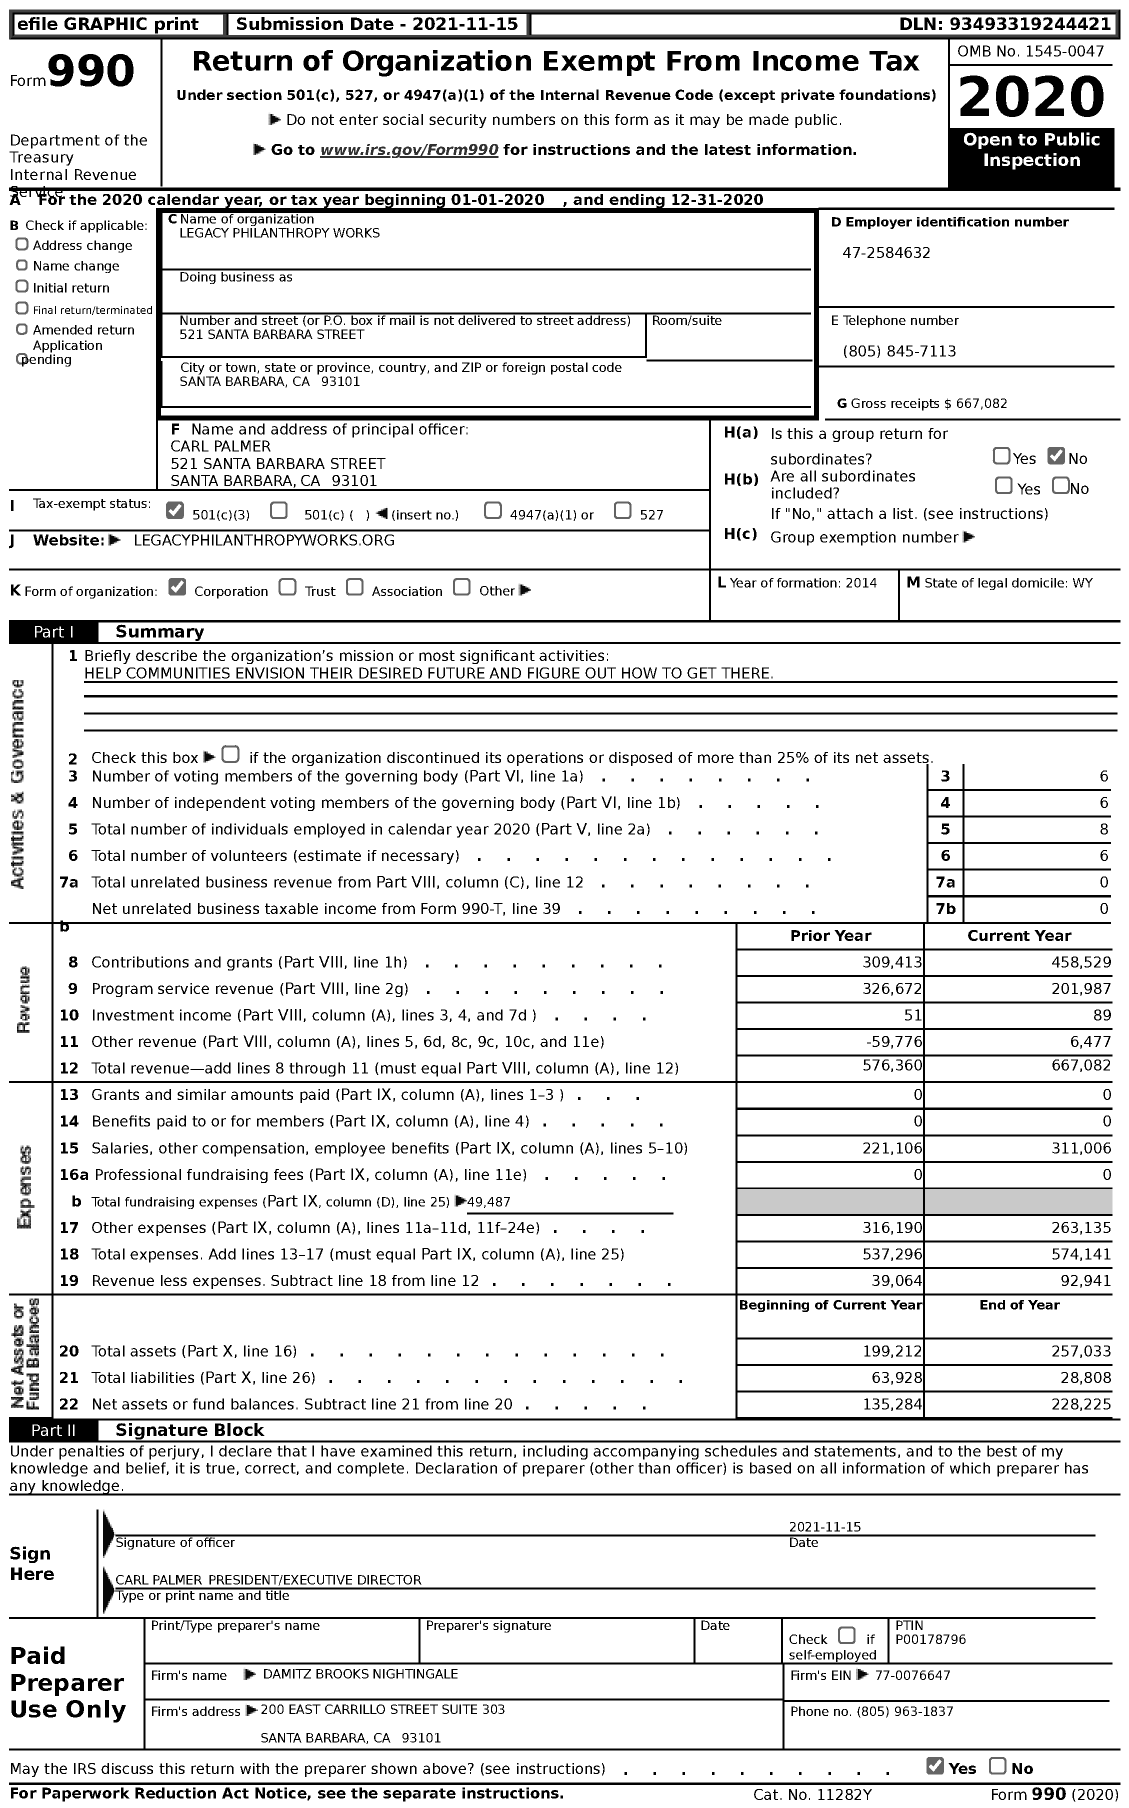 Image of first page of 2020 Form 990 for Legacy Philanthropy Works